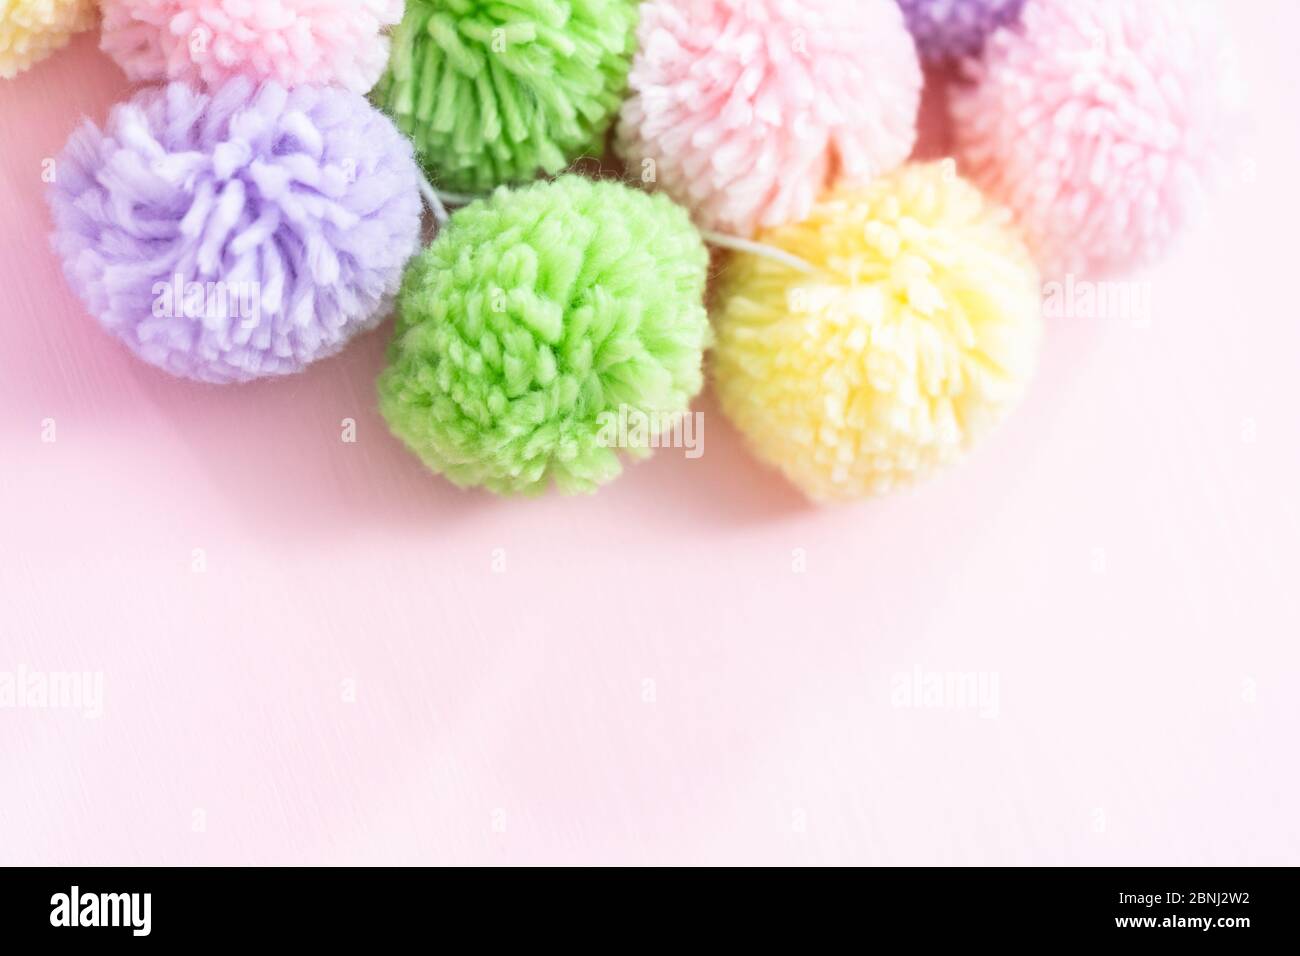 Pom Poms Blue, White, Pink and Red Highlights Stock Photo - Image of white,  pink: 197585694